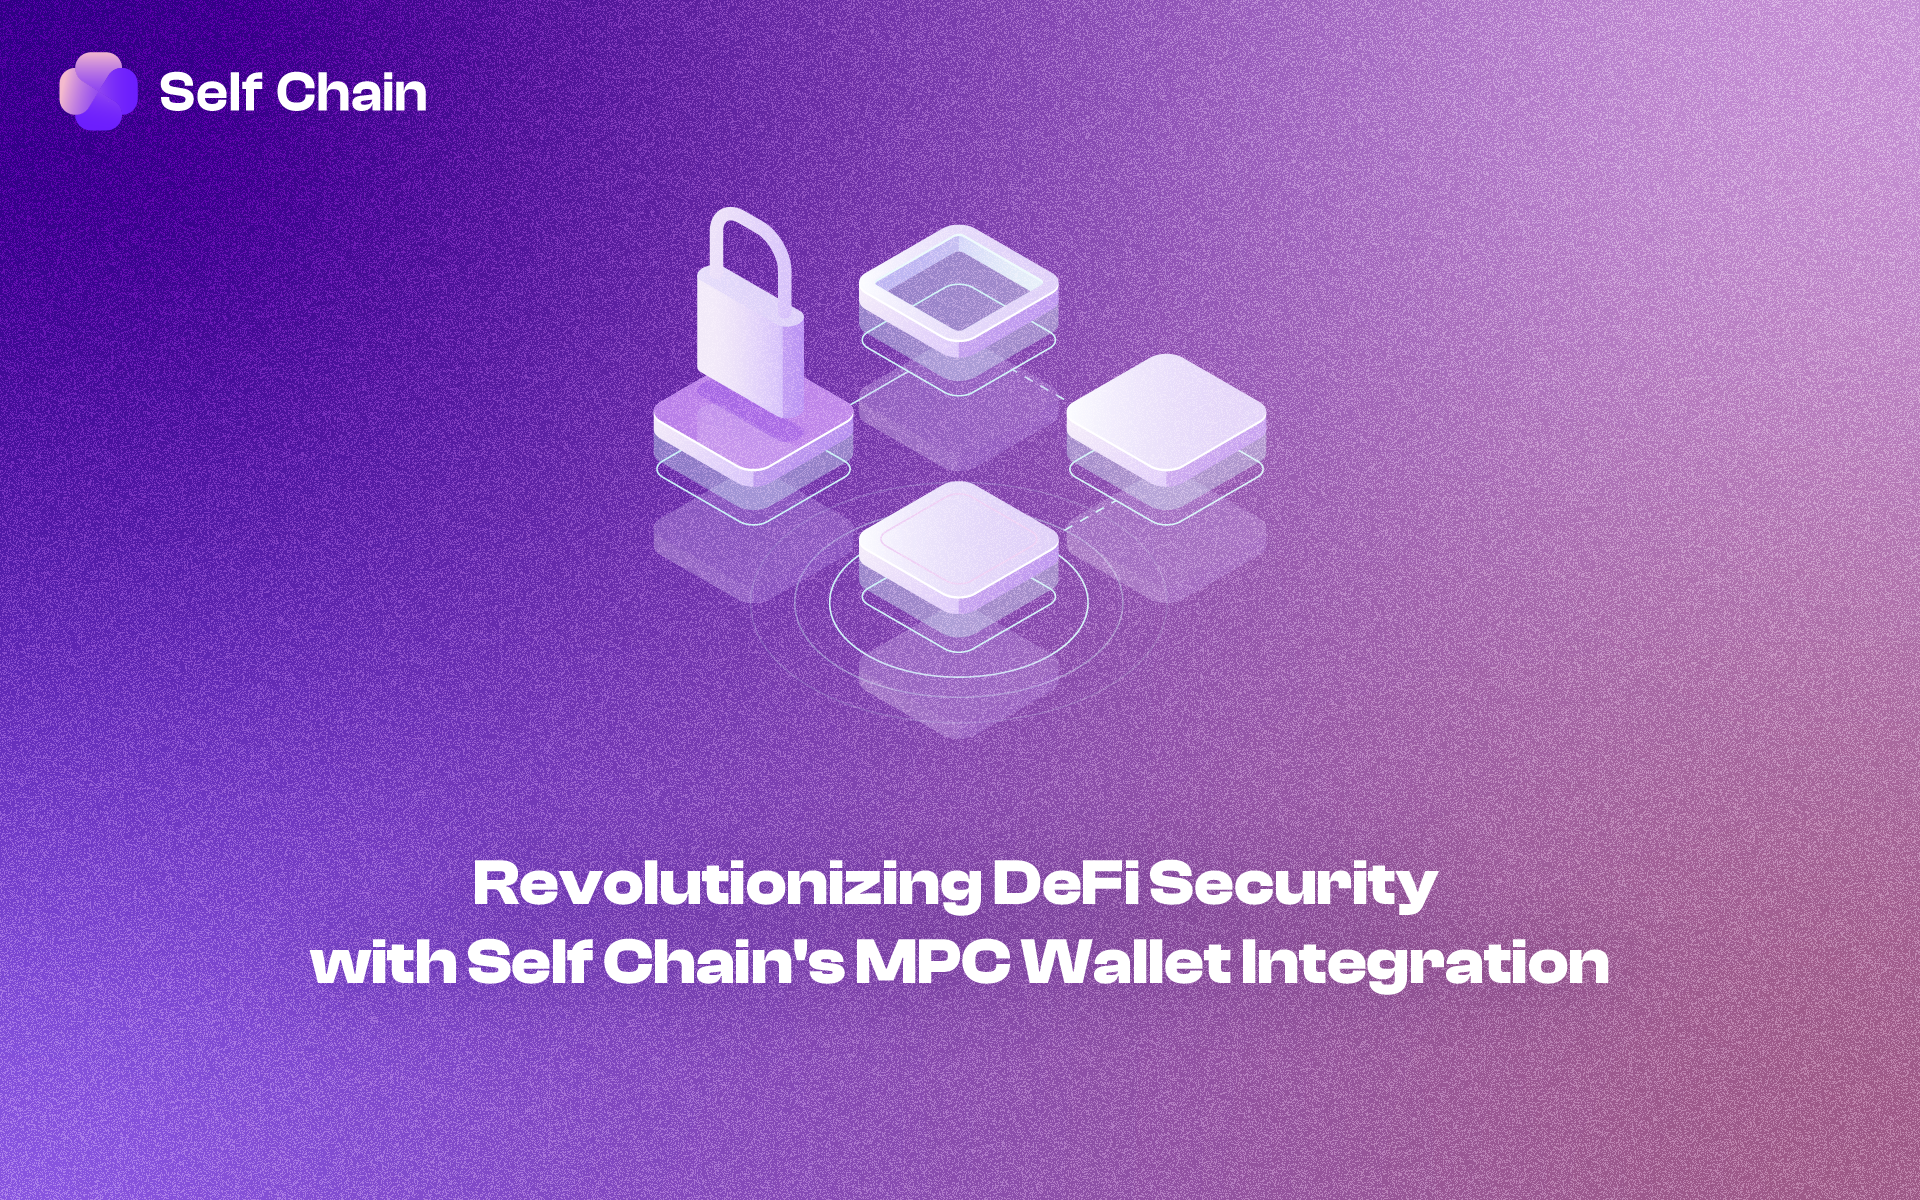 Revolutionizing DeFi Security with Self Chain's MPC Wallet Integration